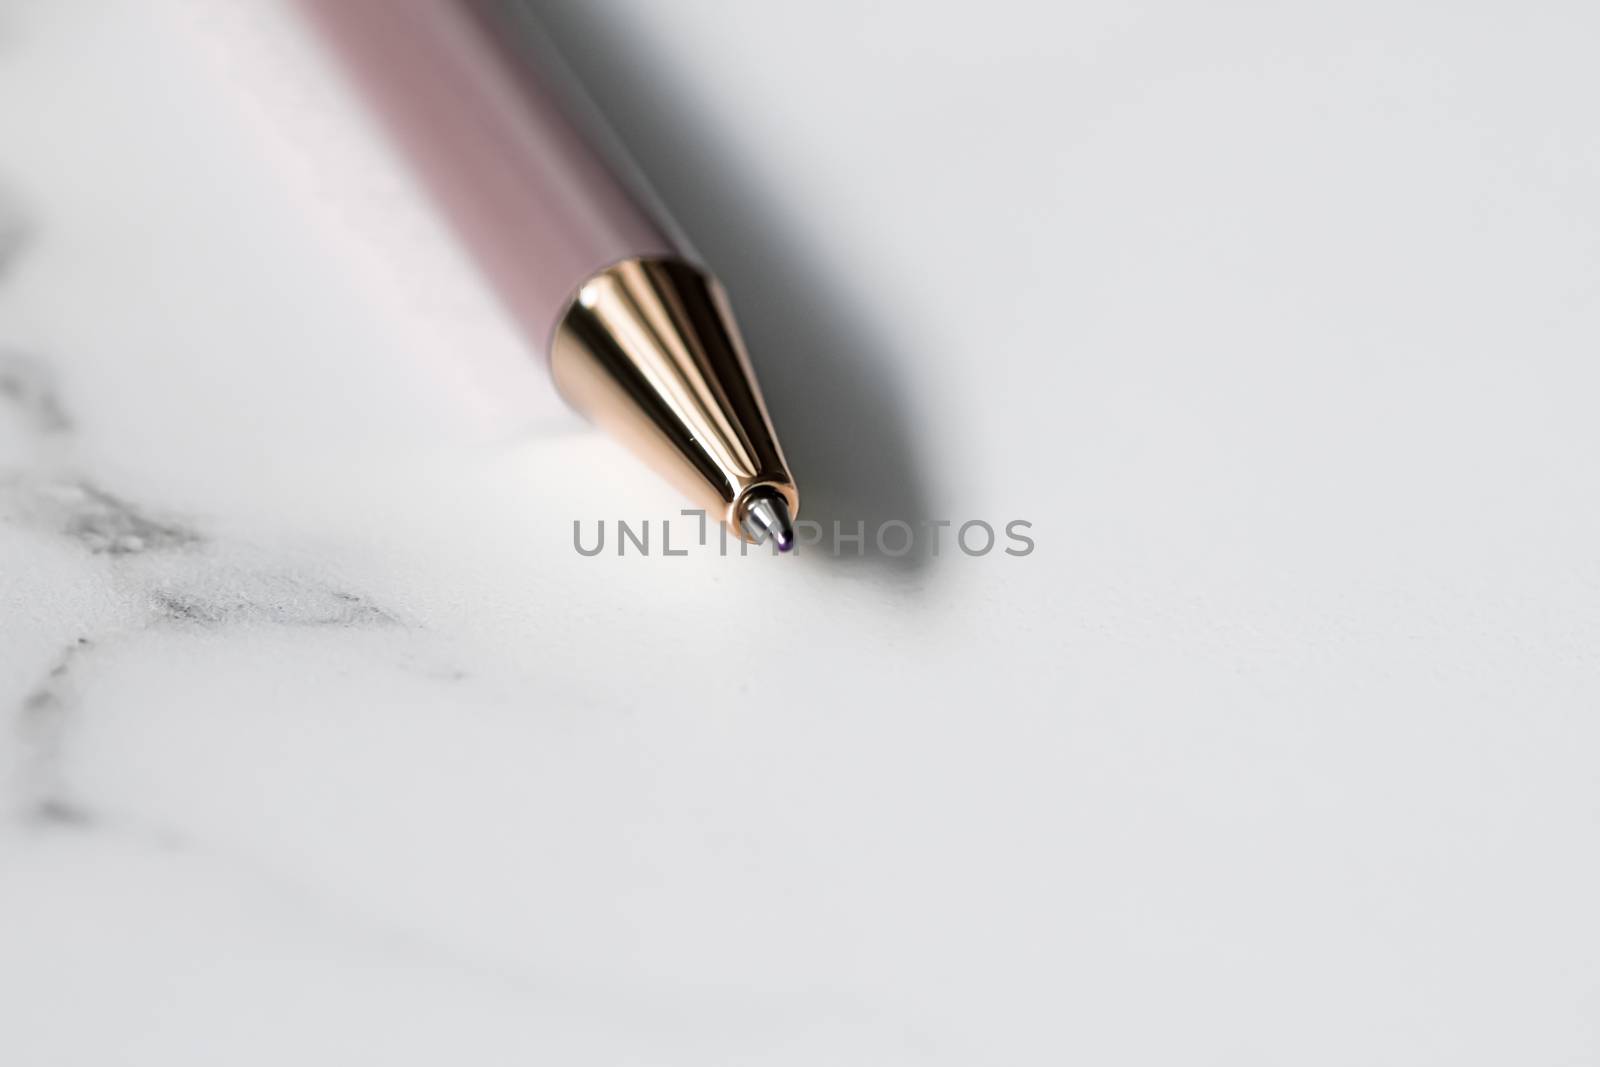 Pen on marble background, luxury stationery and business branding